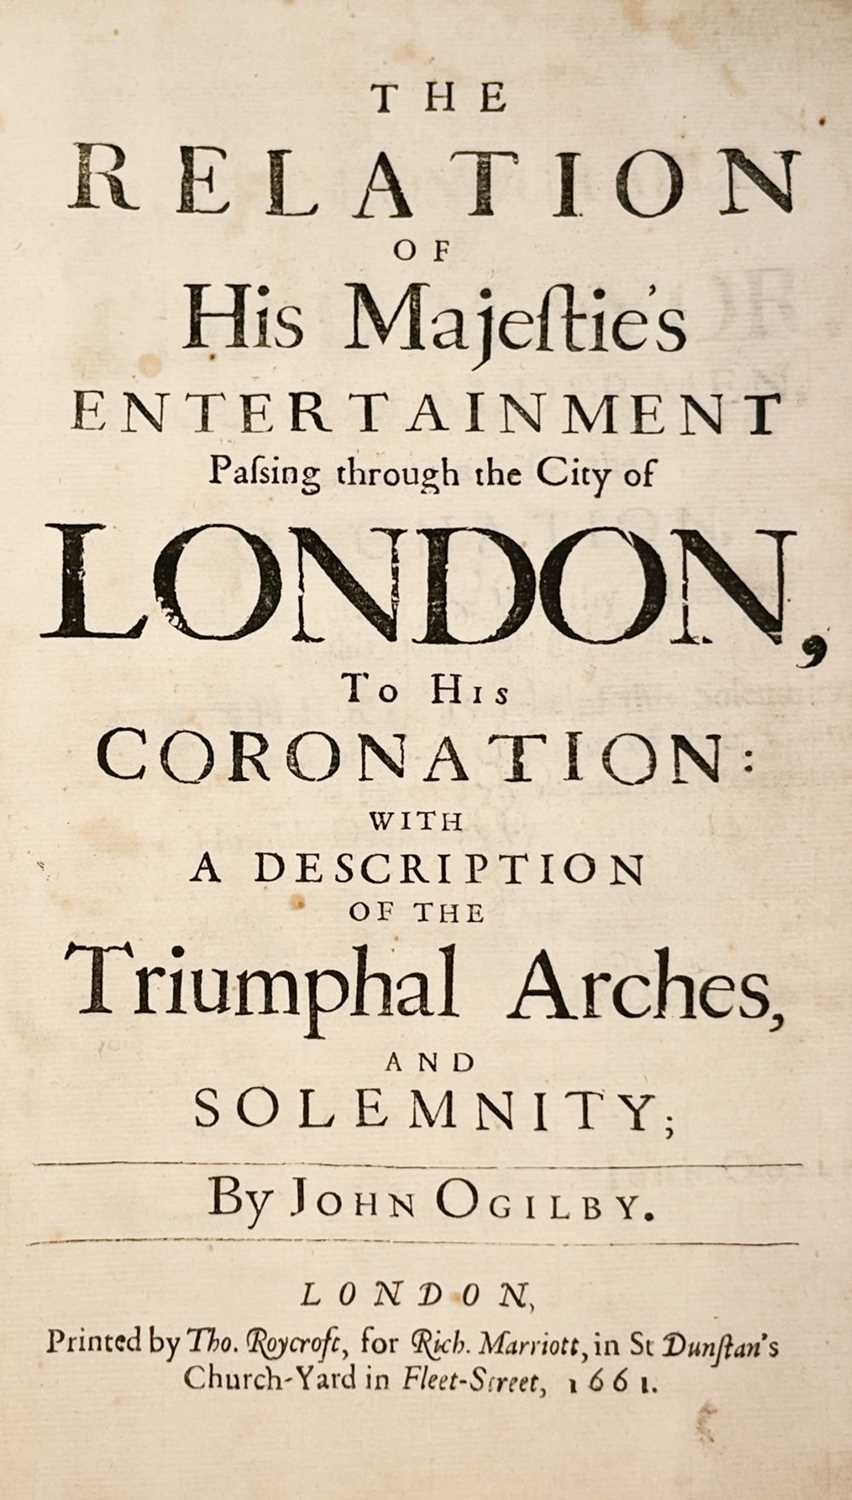 Lot 344 - Ogilby (John). The Relation of His Majestie’s Entertainment Passing through the City of London, 1661